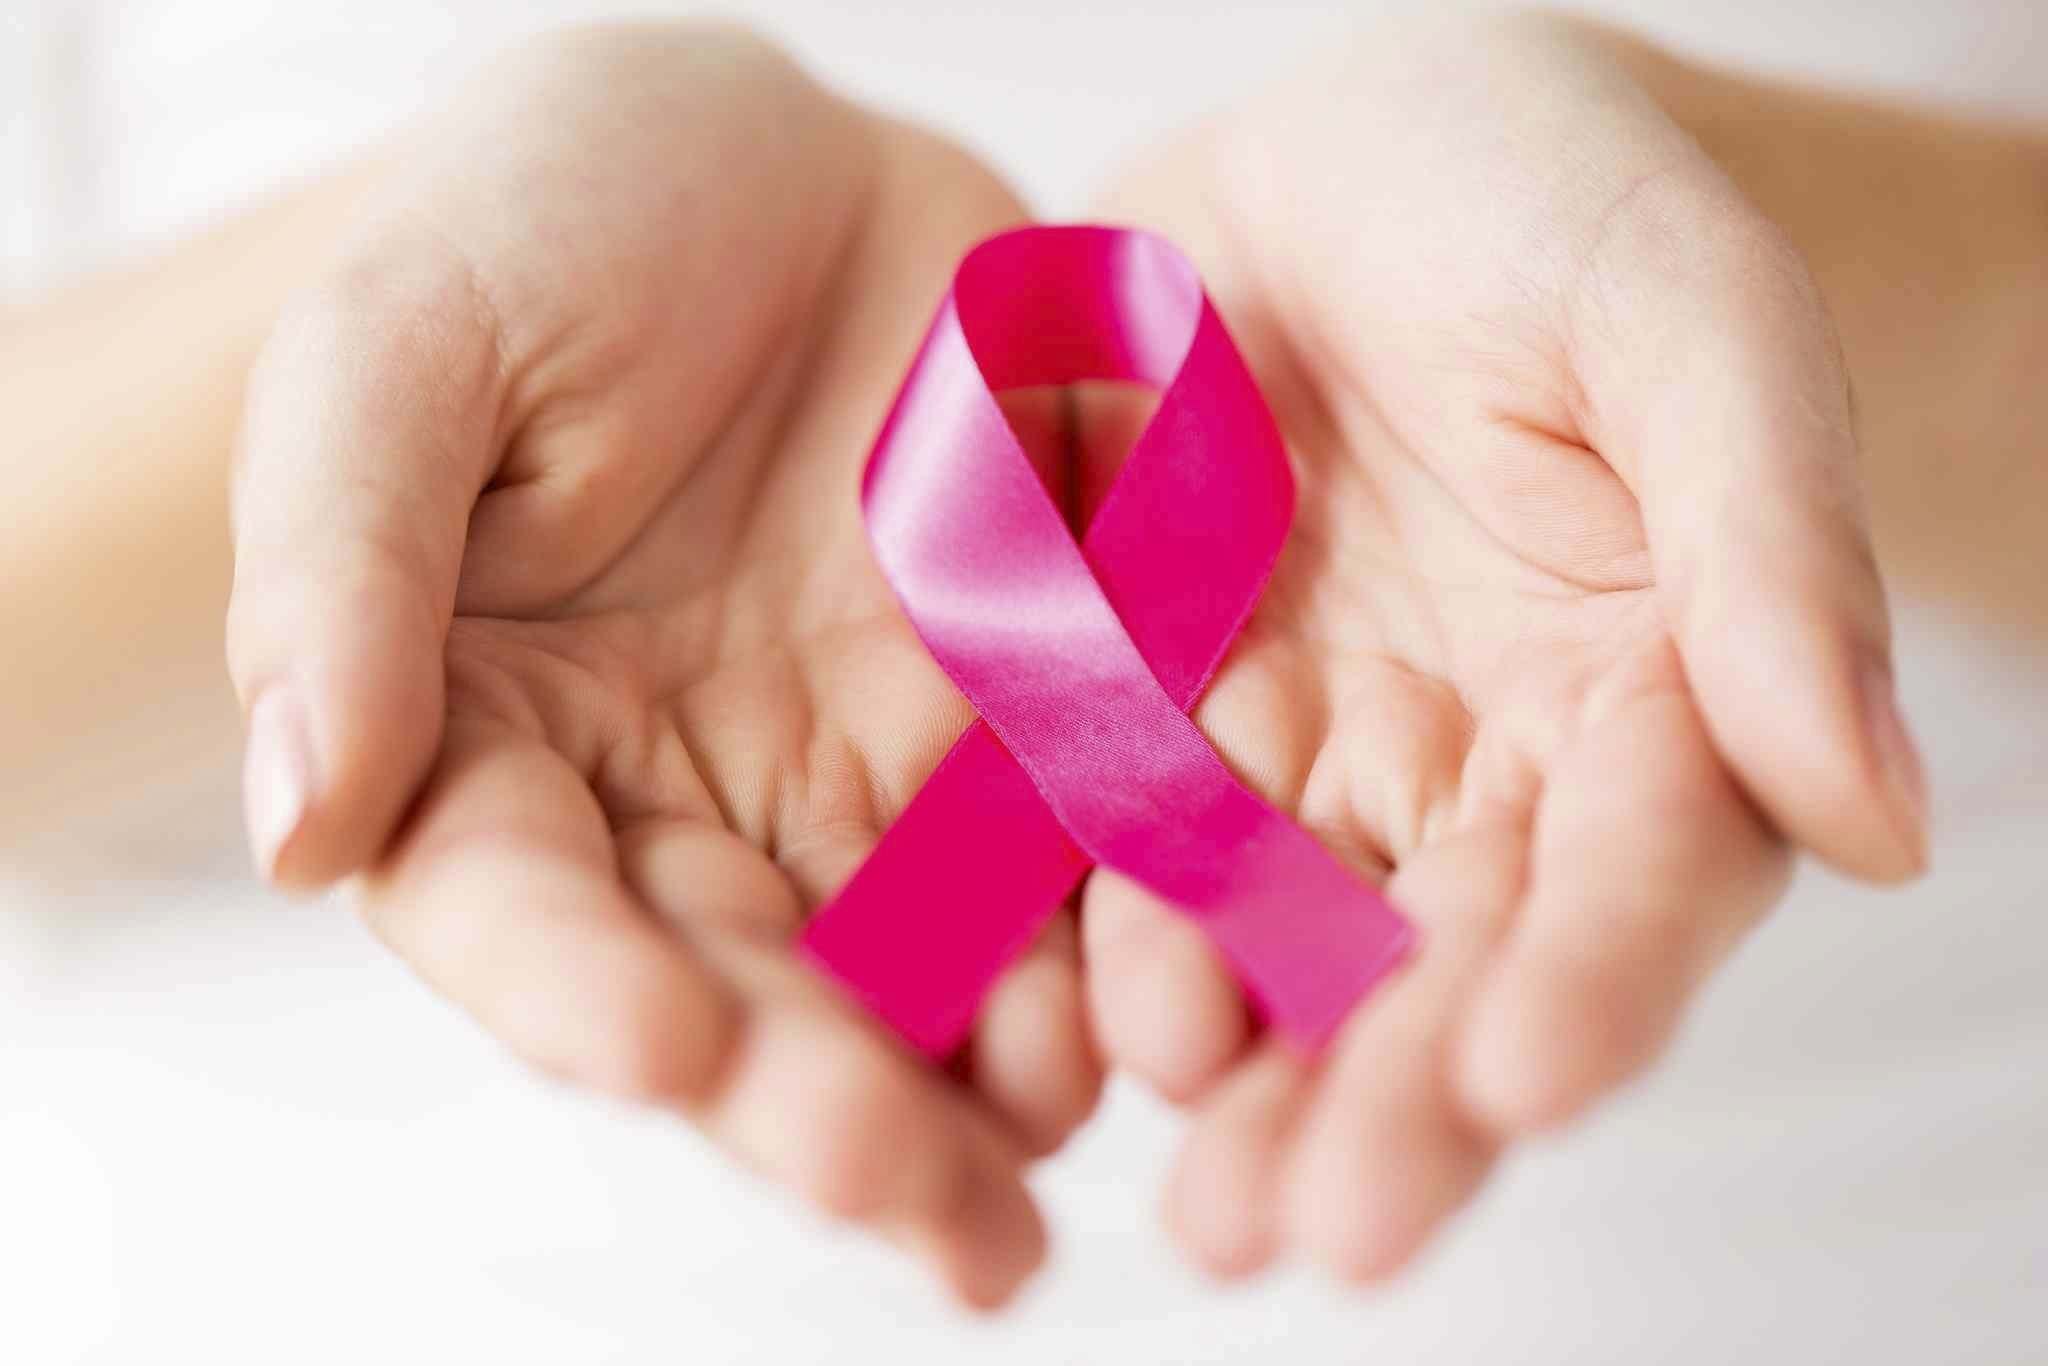 Catching Cancer Early Can Save Lives | Financial Tribune